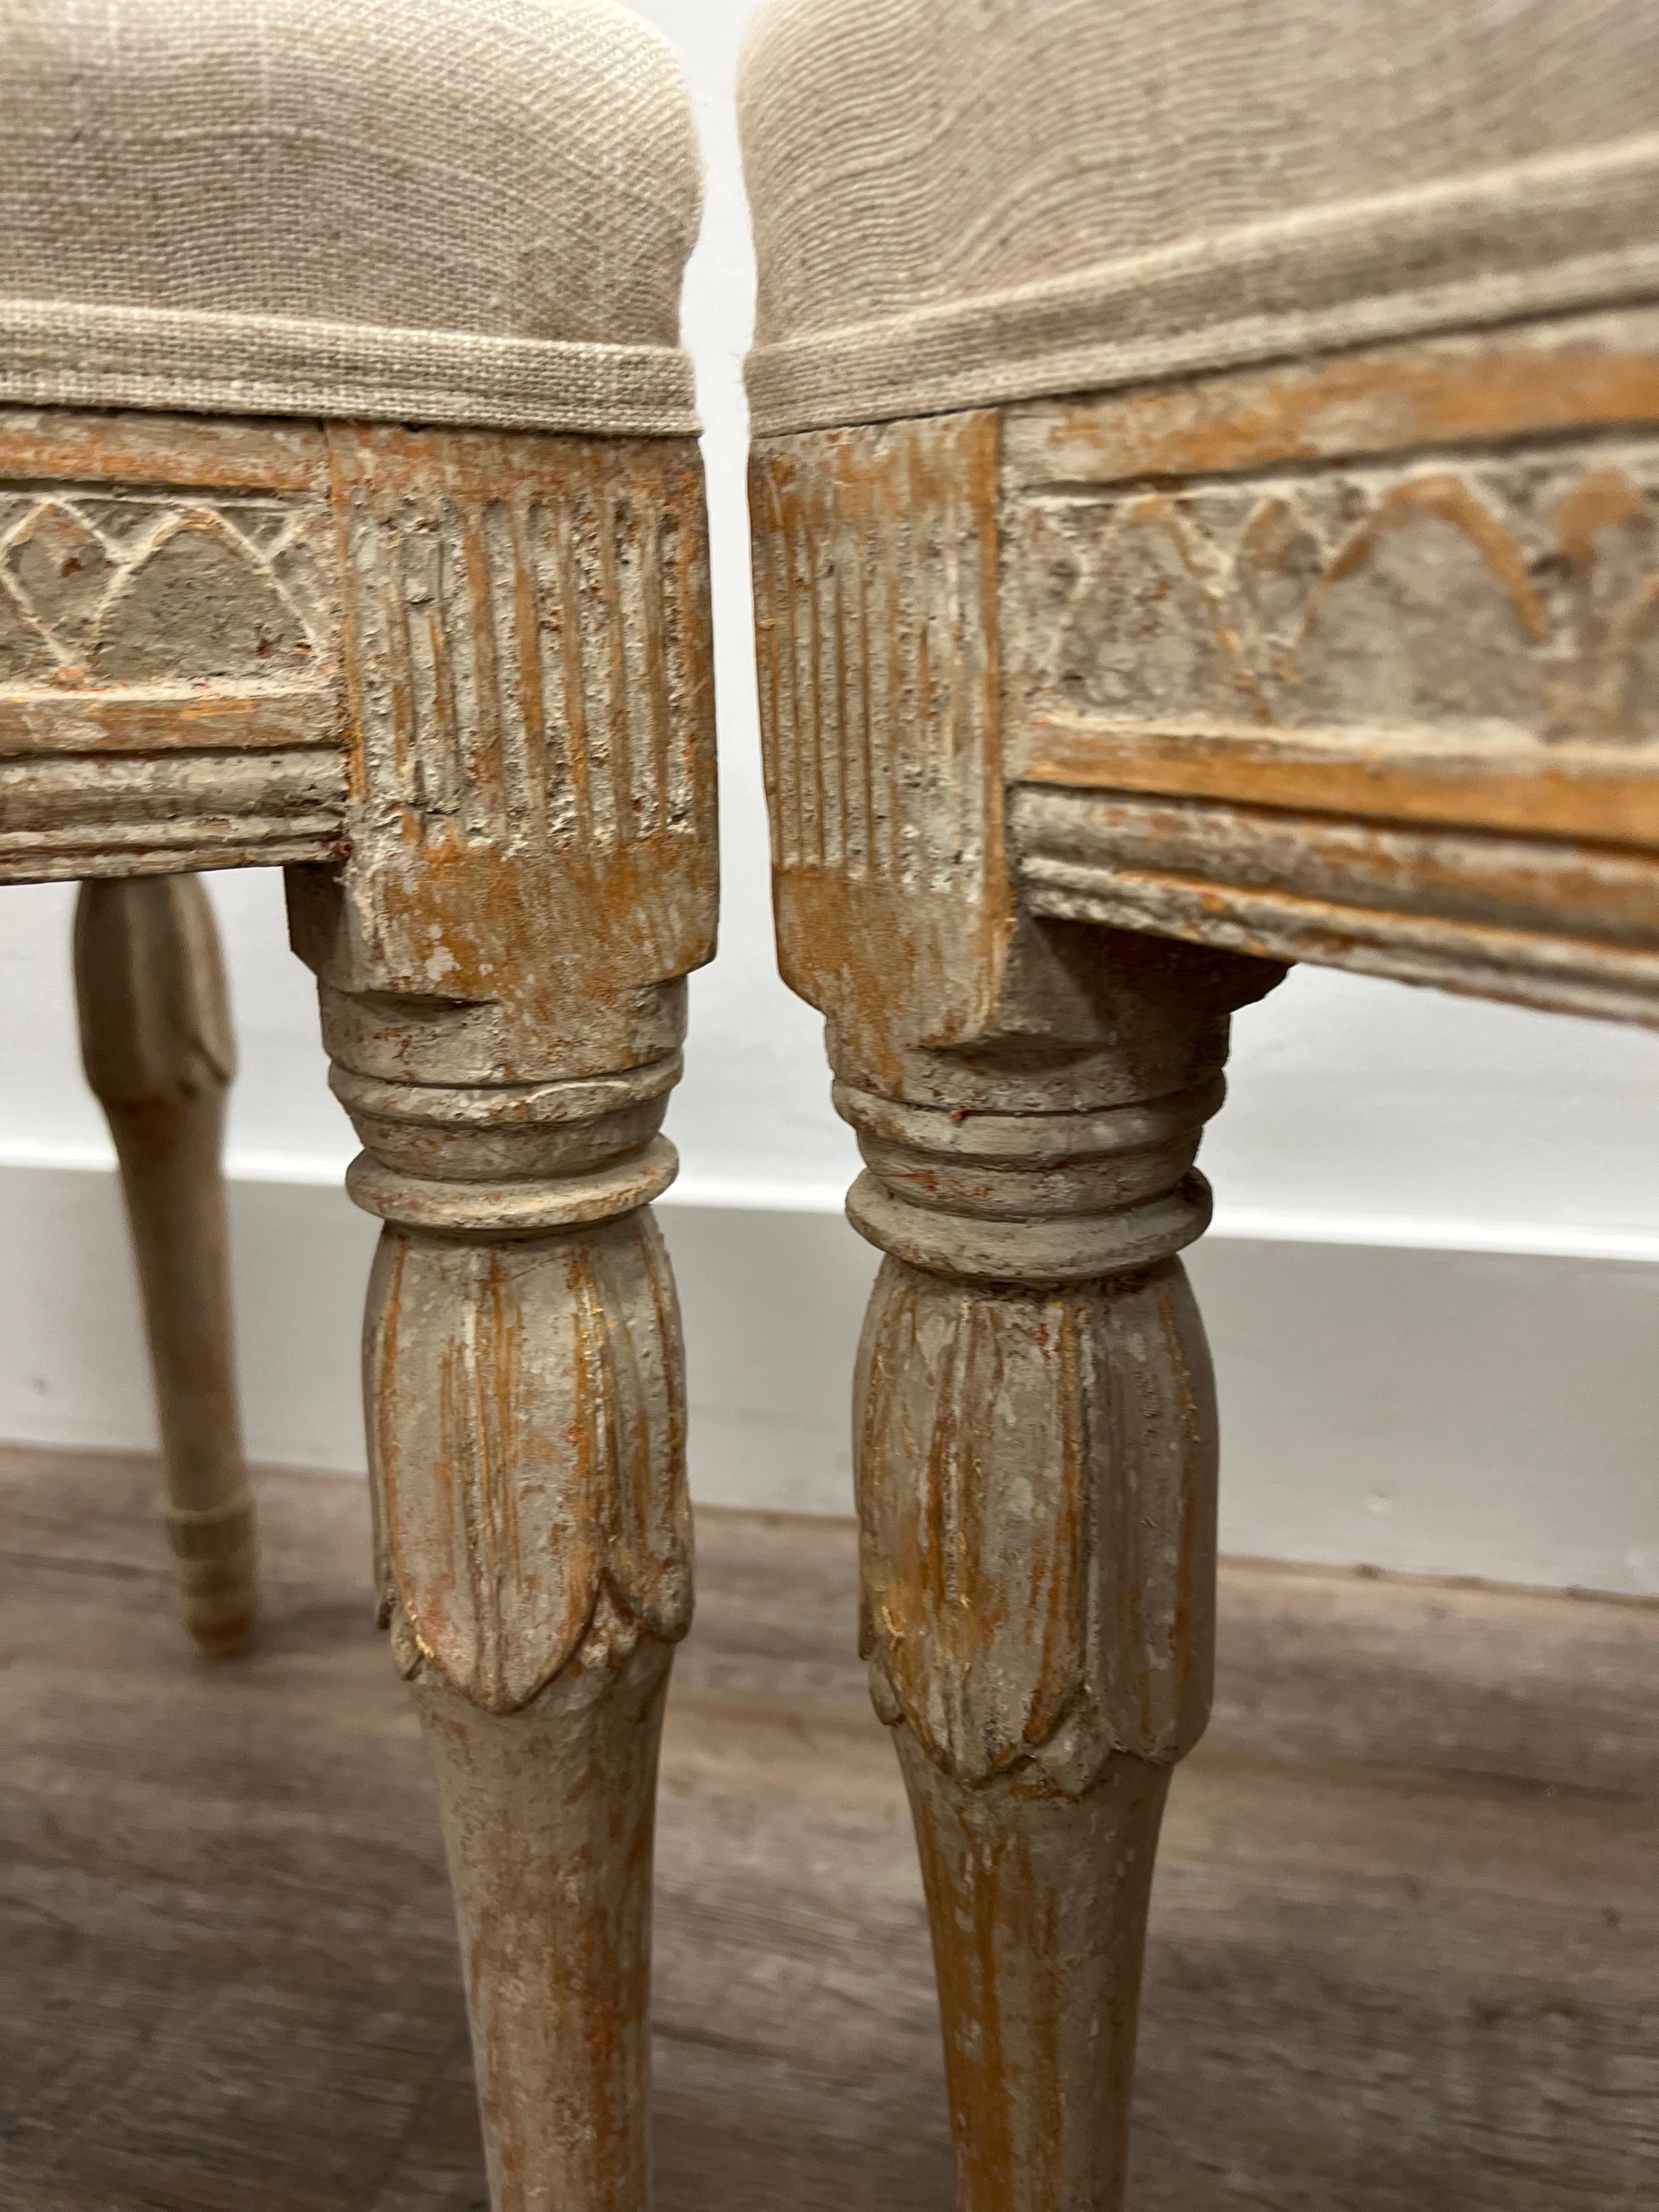 A beautiful pair of Swedish Gustavian footstools from Gotland. Leaf cut decor around the sides with reeded fleurons on the corners. The leg tops are finished with inverted pedals over turned and tapered bases. This piece has been tastefully